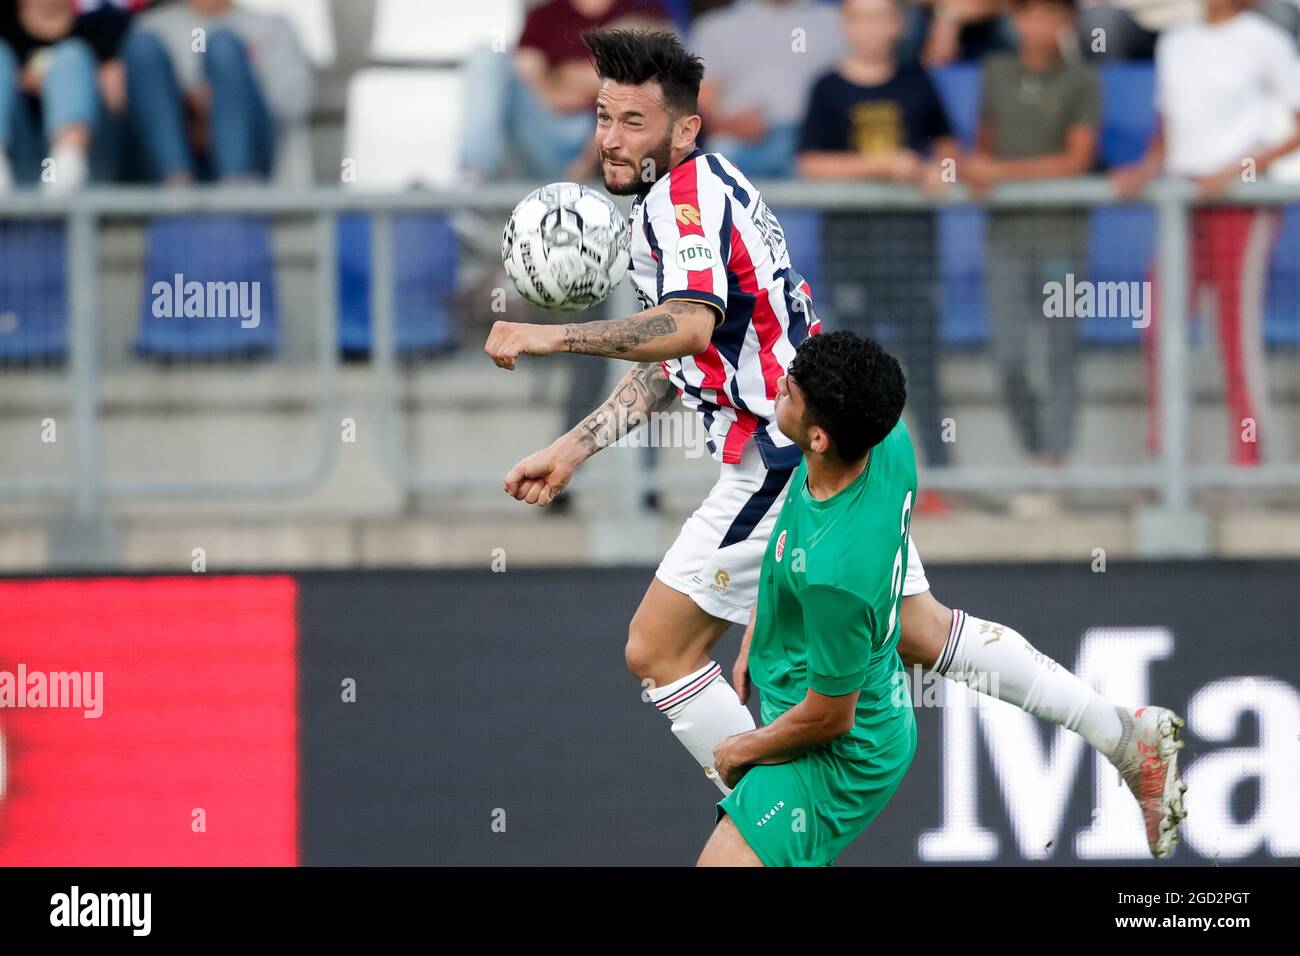 TILBURG, NETHERLANDS - AUGUST 10: Pol Llonch of Willem II during the Pre-season Friendly match between Willem II and Royal Excelsior Virton at the Koning Willem II Stadion on August 10, 2021 in Tilburg, Netherlands (Photo by Broer van den Boom/Orange Pictures) Stock Photo